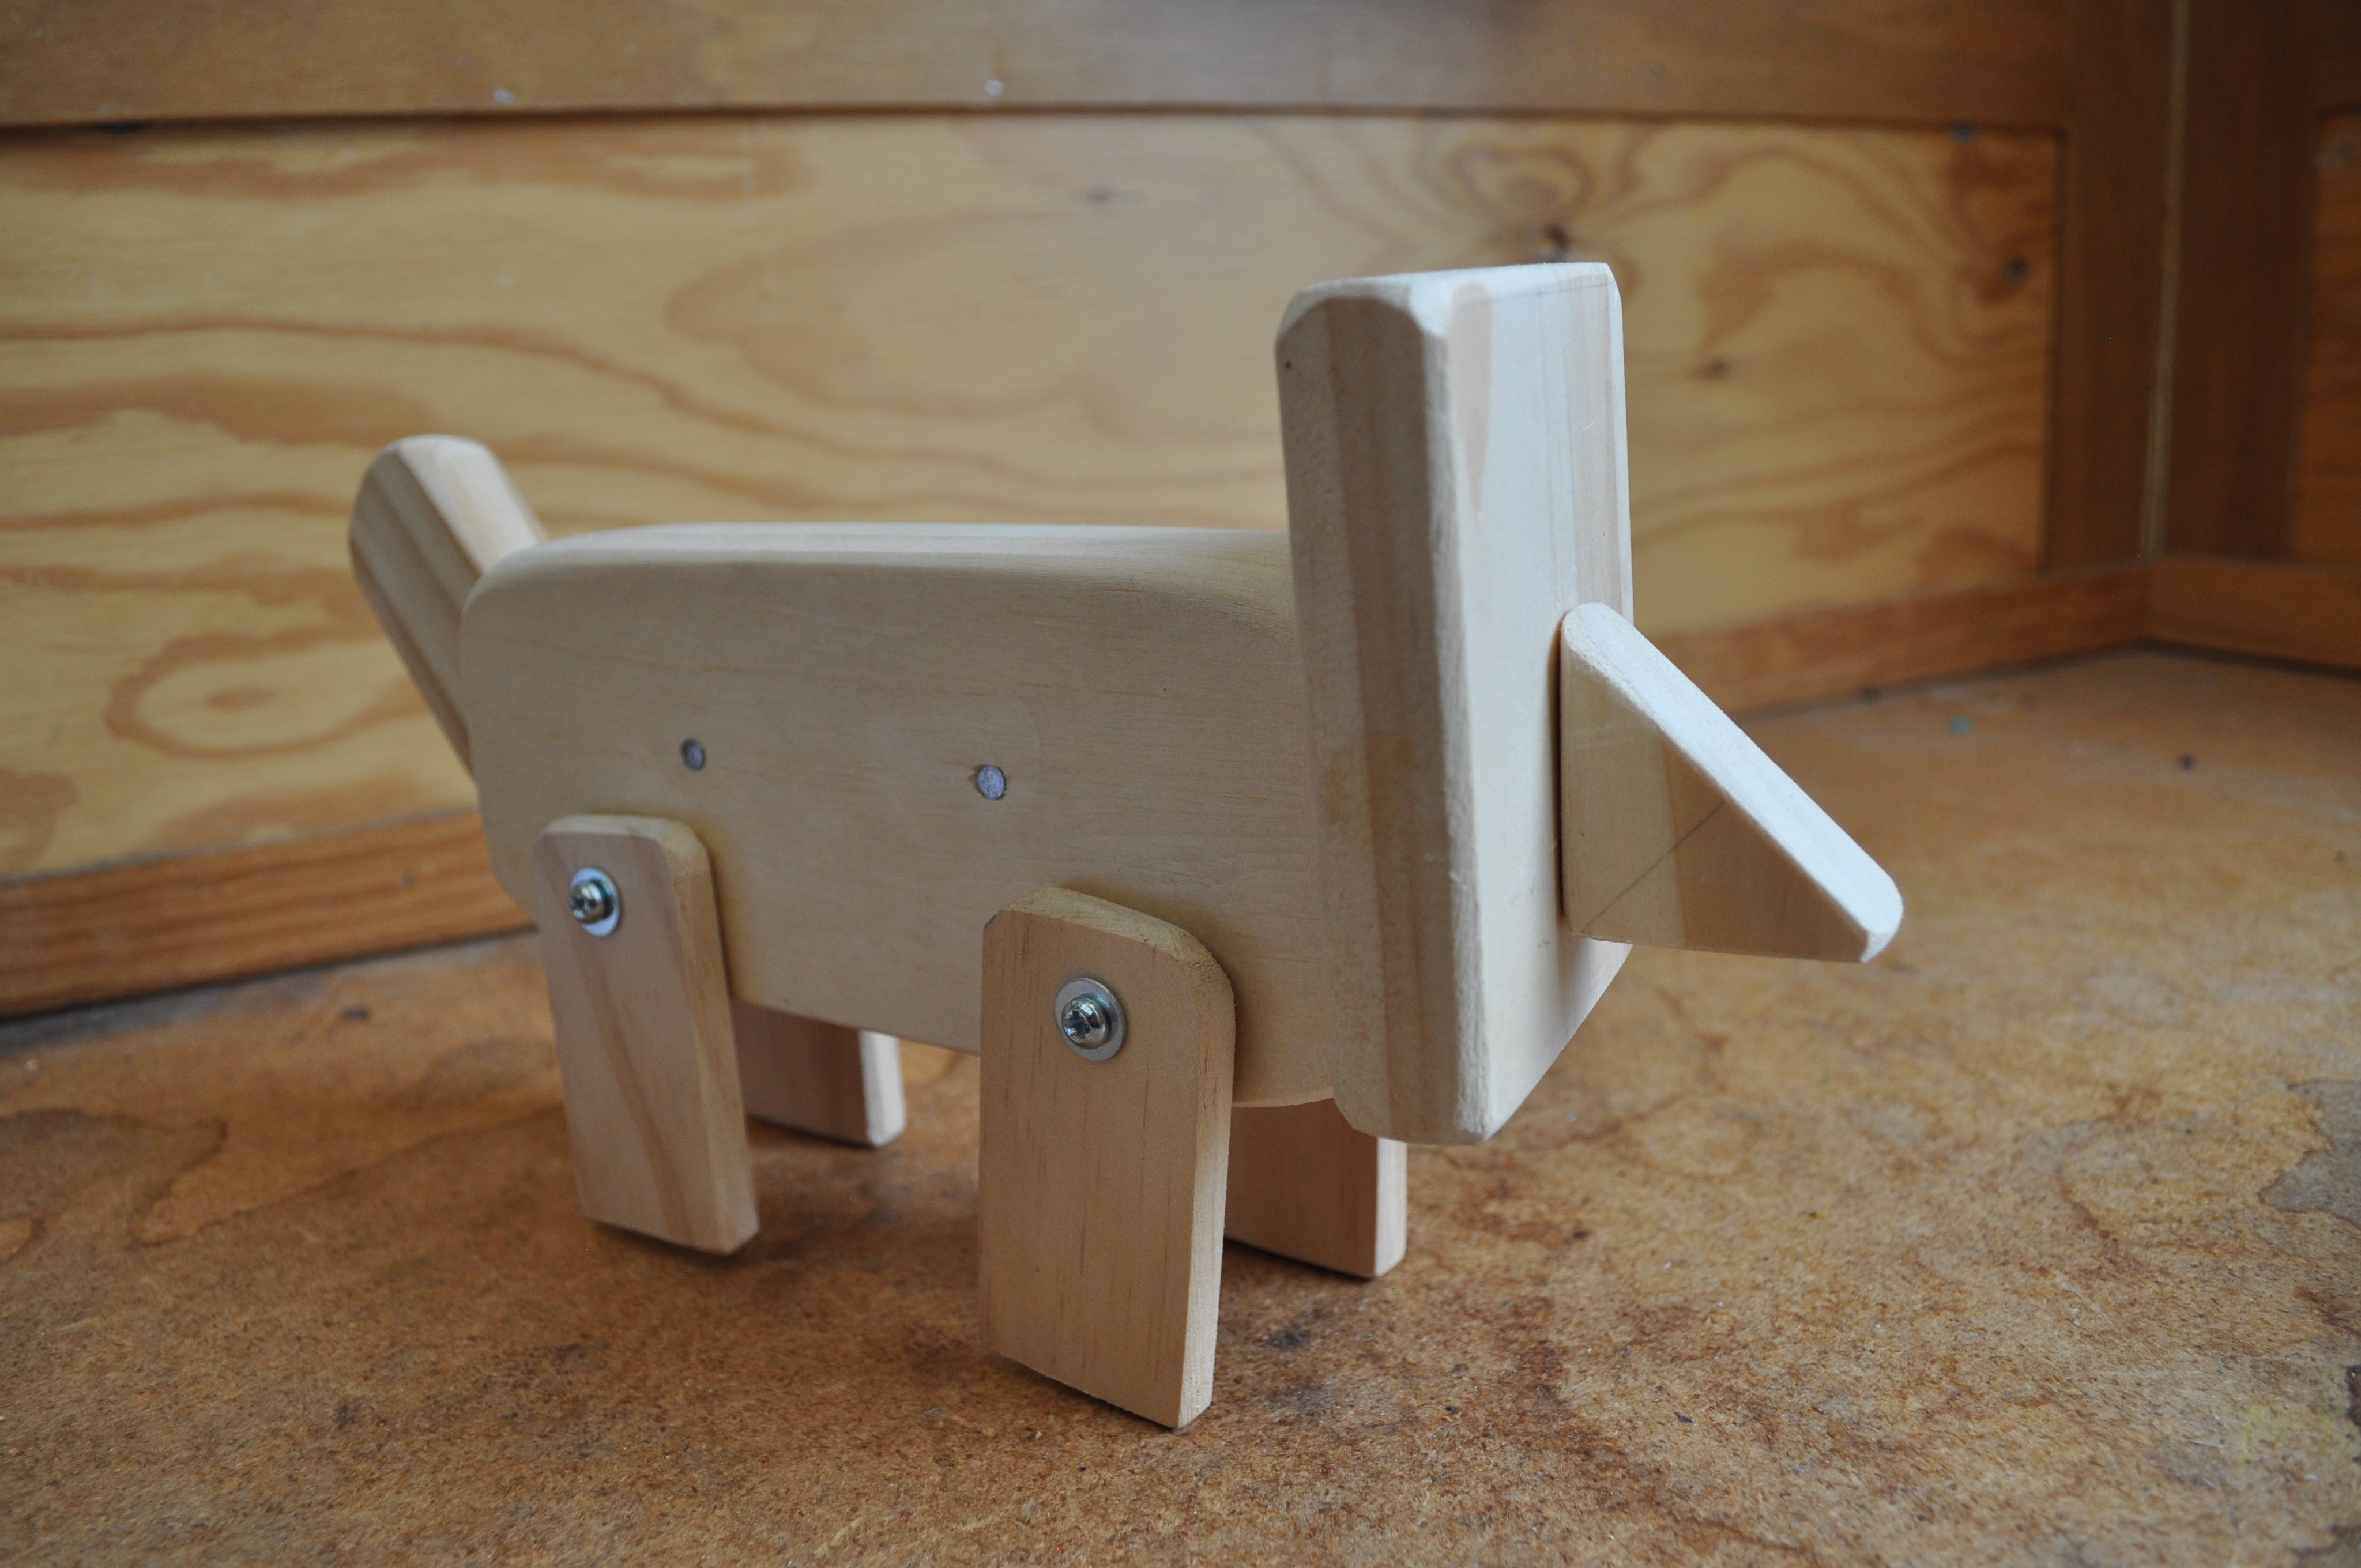 Woodworking Bus Program: wooden animal sculpture created by child